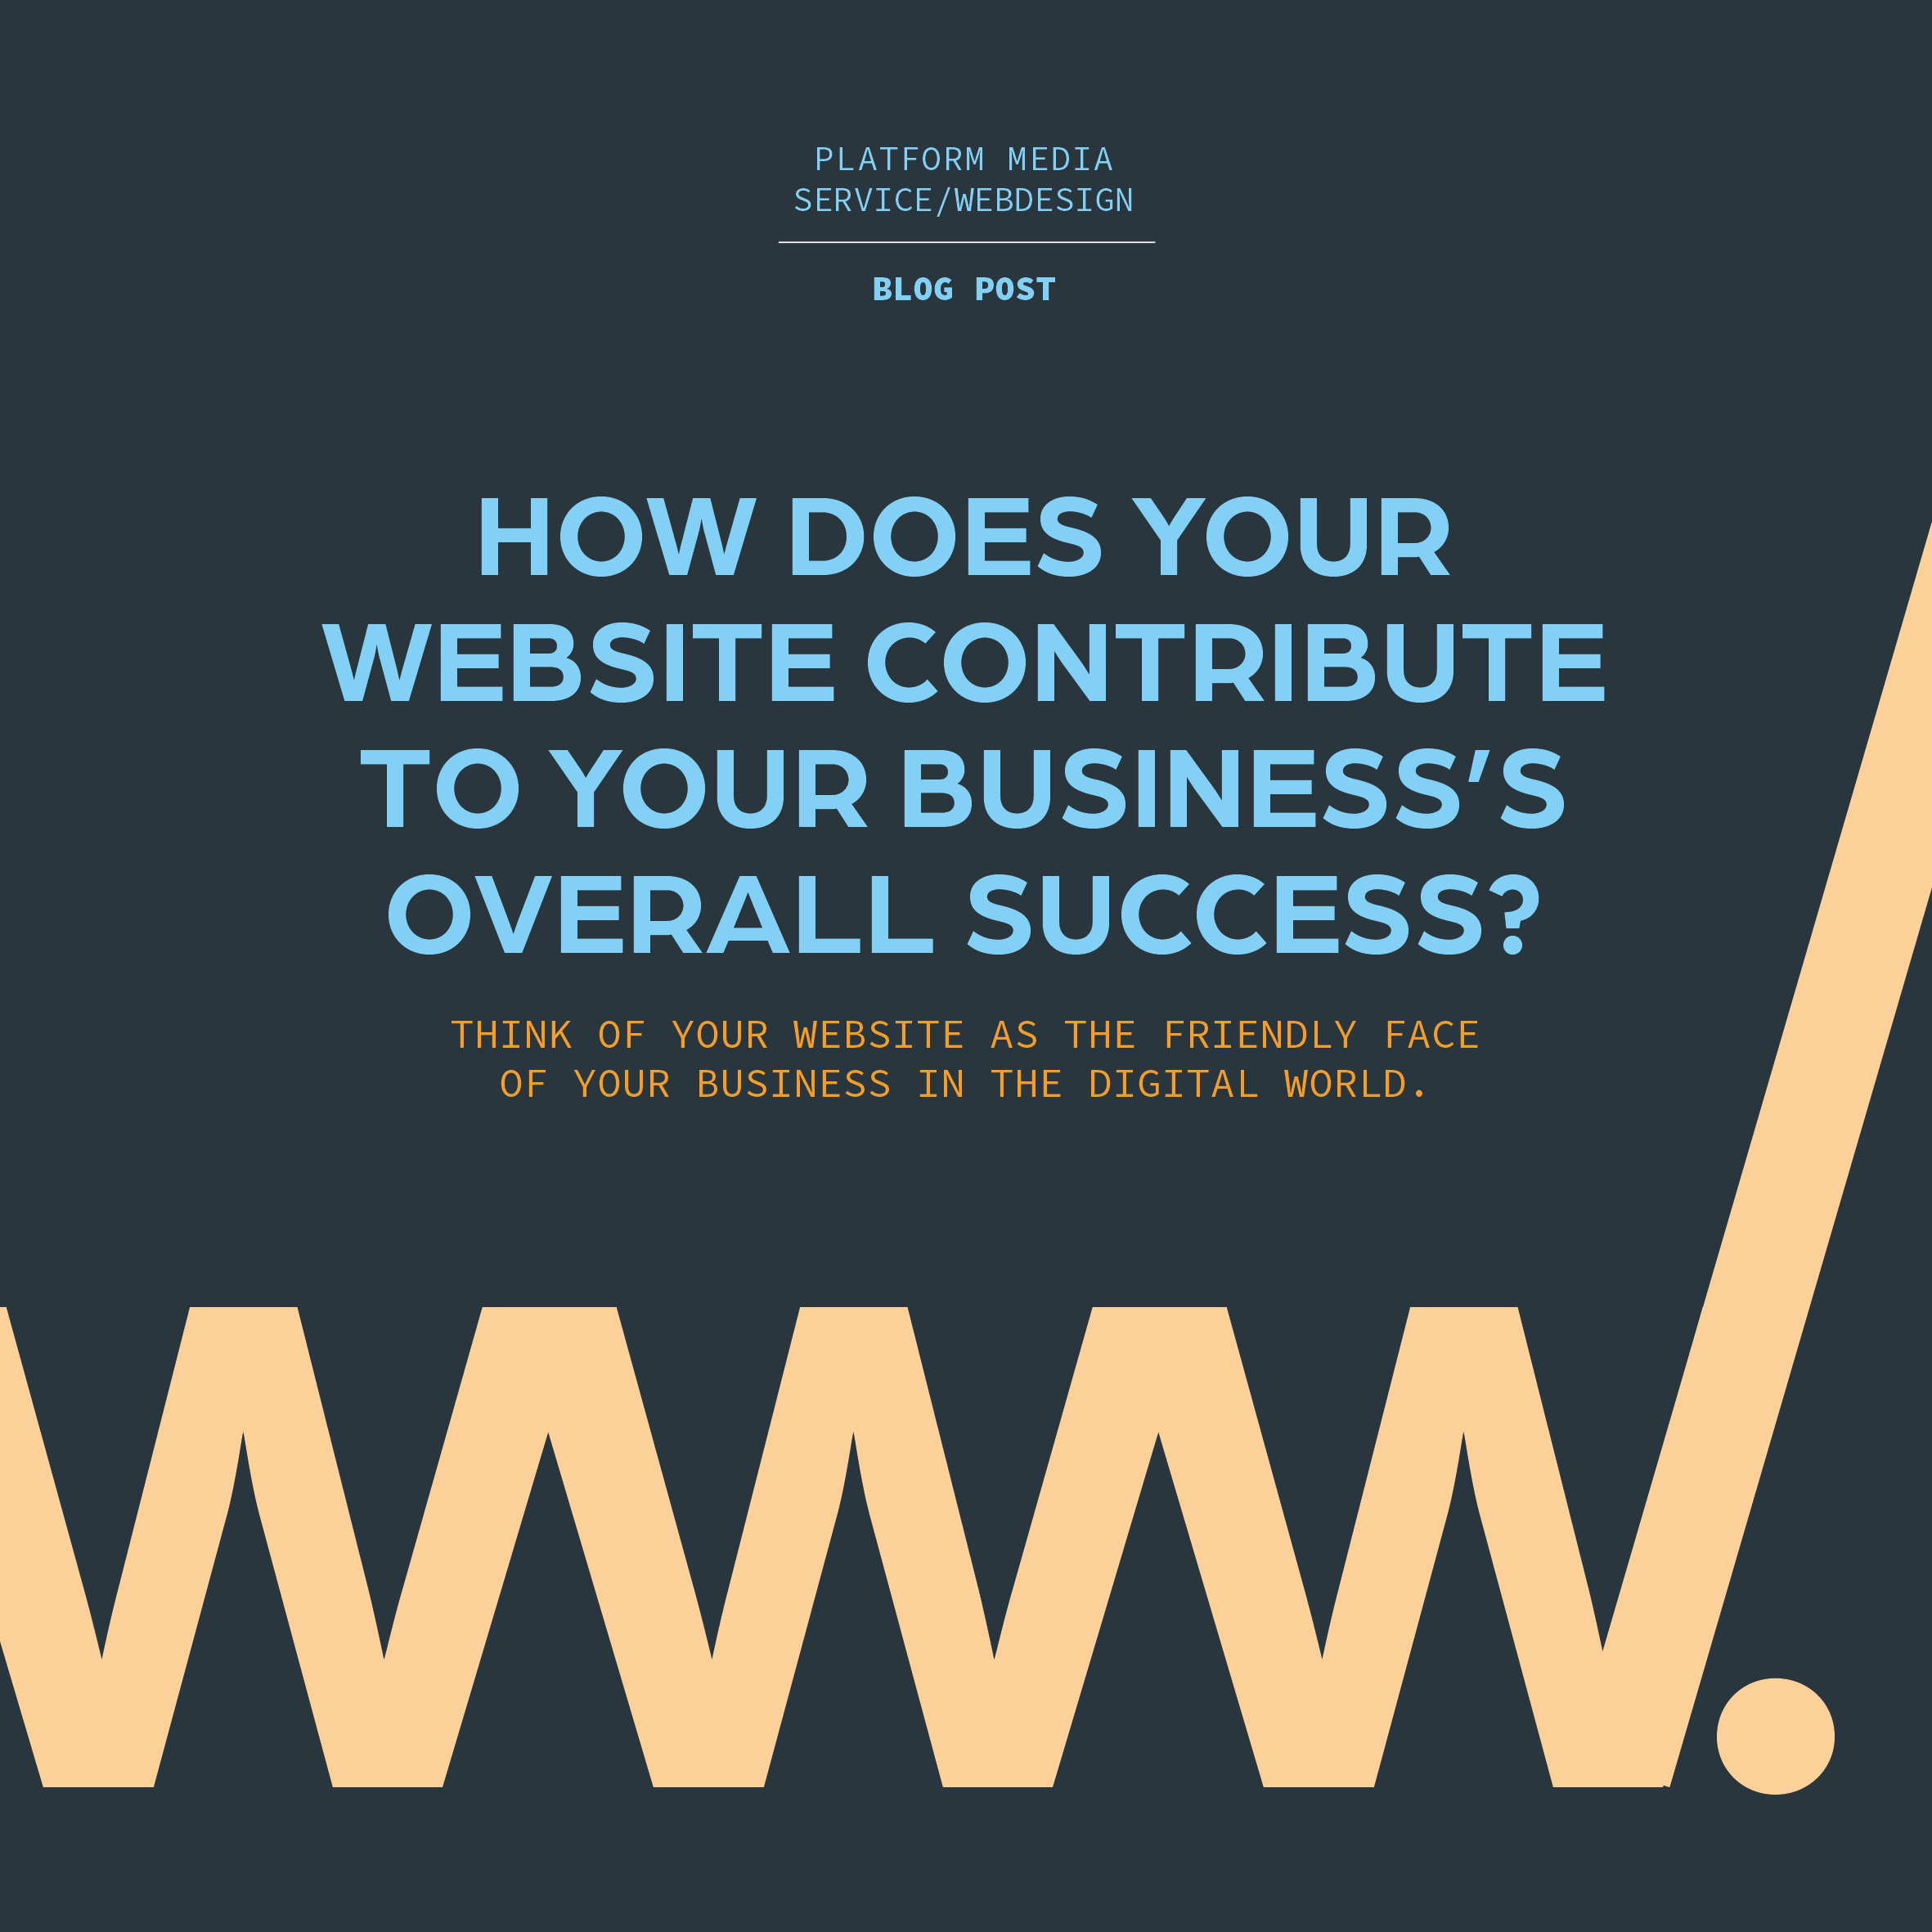 How does your website contribute to your business’s overall success?